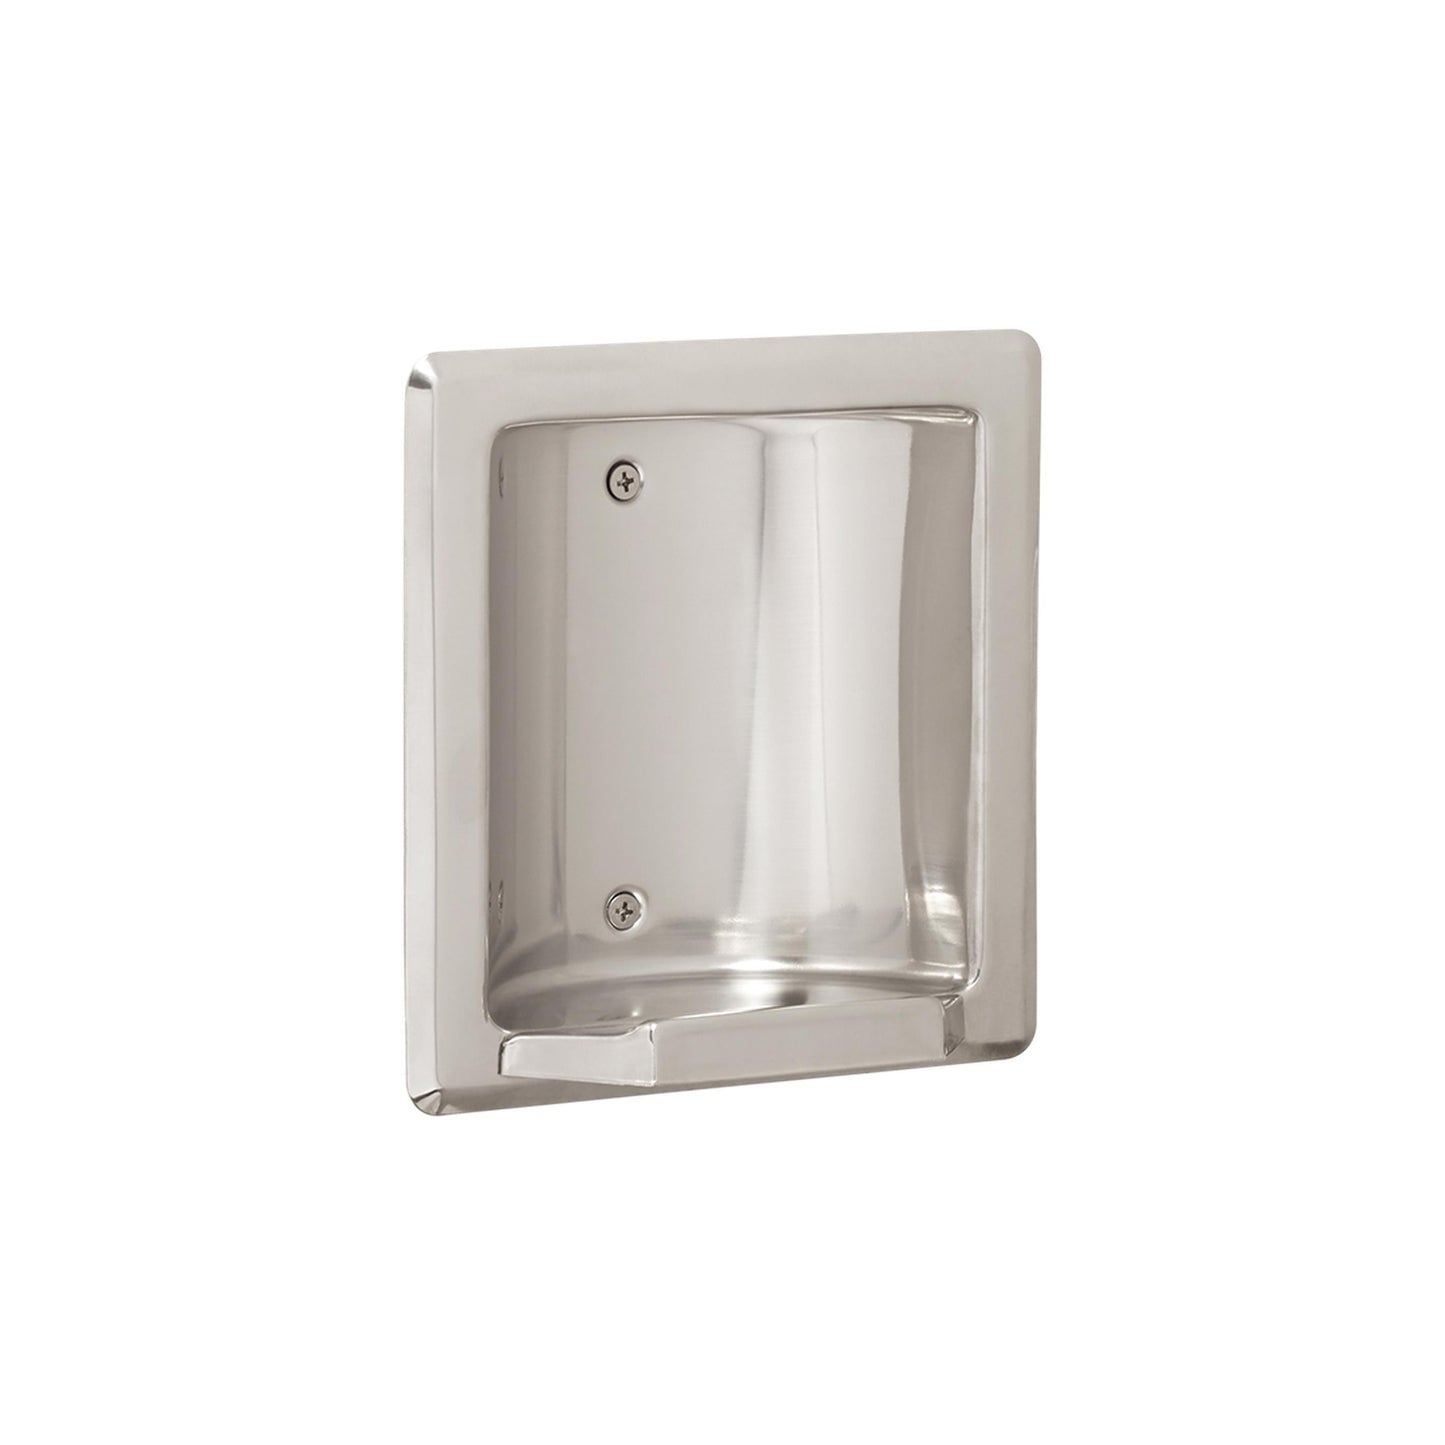 Seachrome Cal Series Recessed Soap and Tumbler Holder with Metal Lip in White Stainless Steel Finish